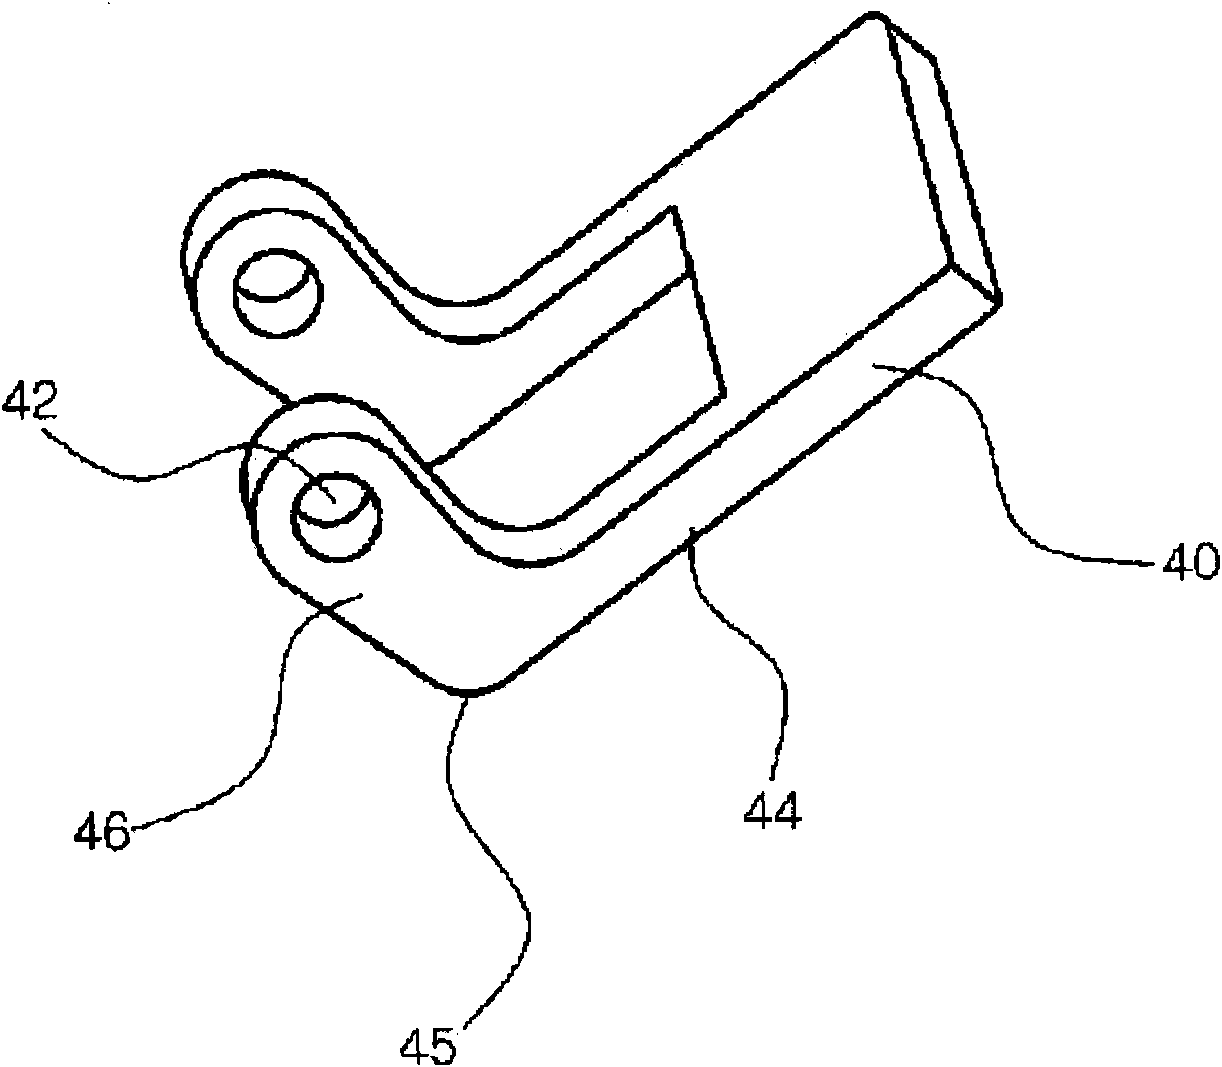 Cock for water purifier having auxiliary lever dispensing water continuously